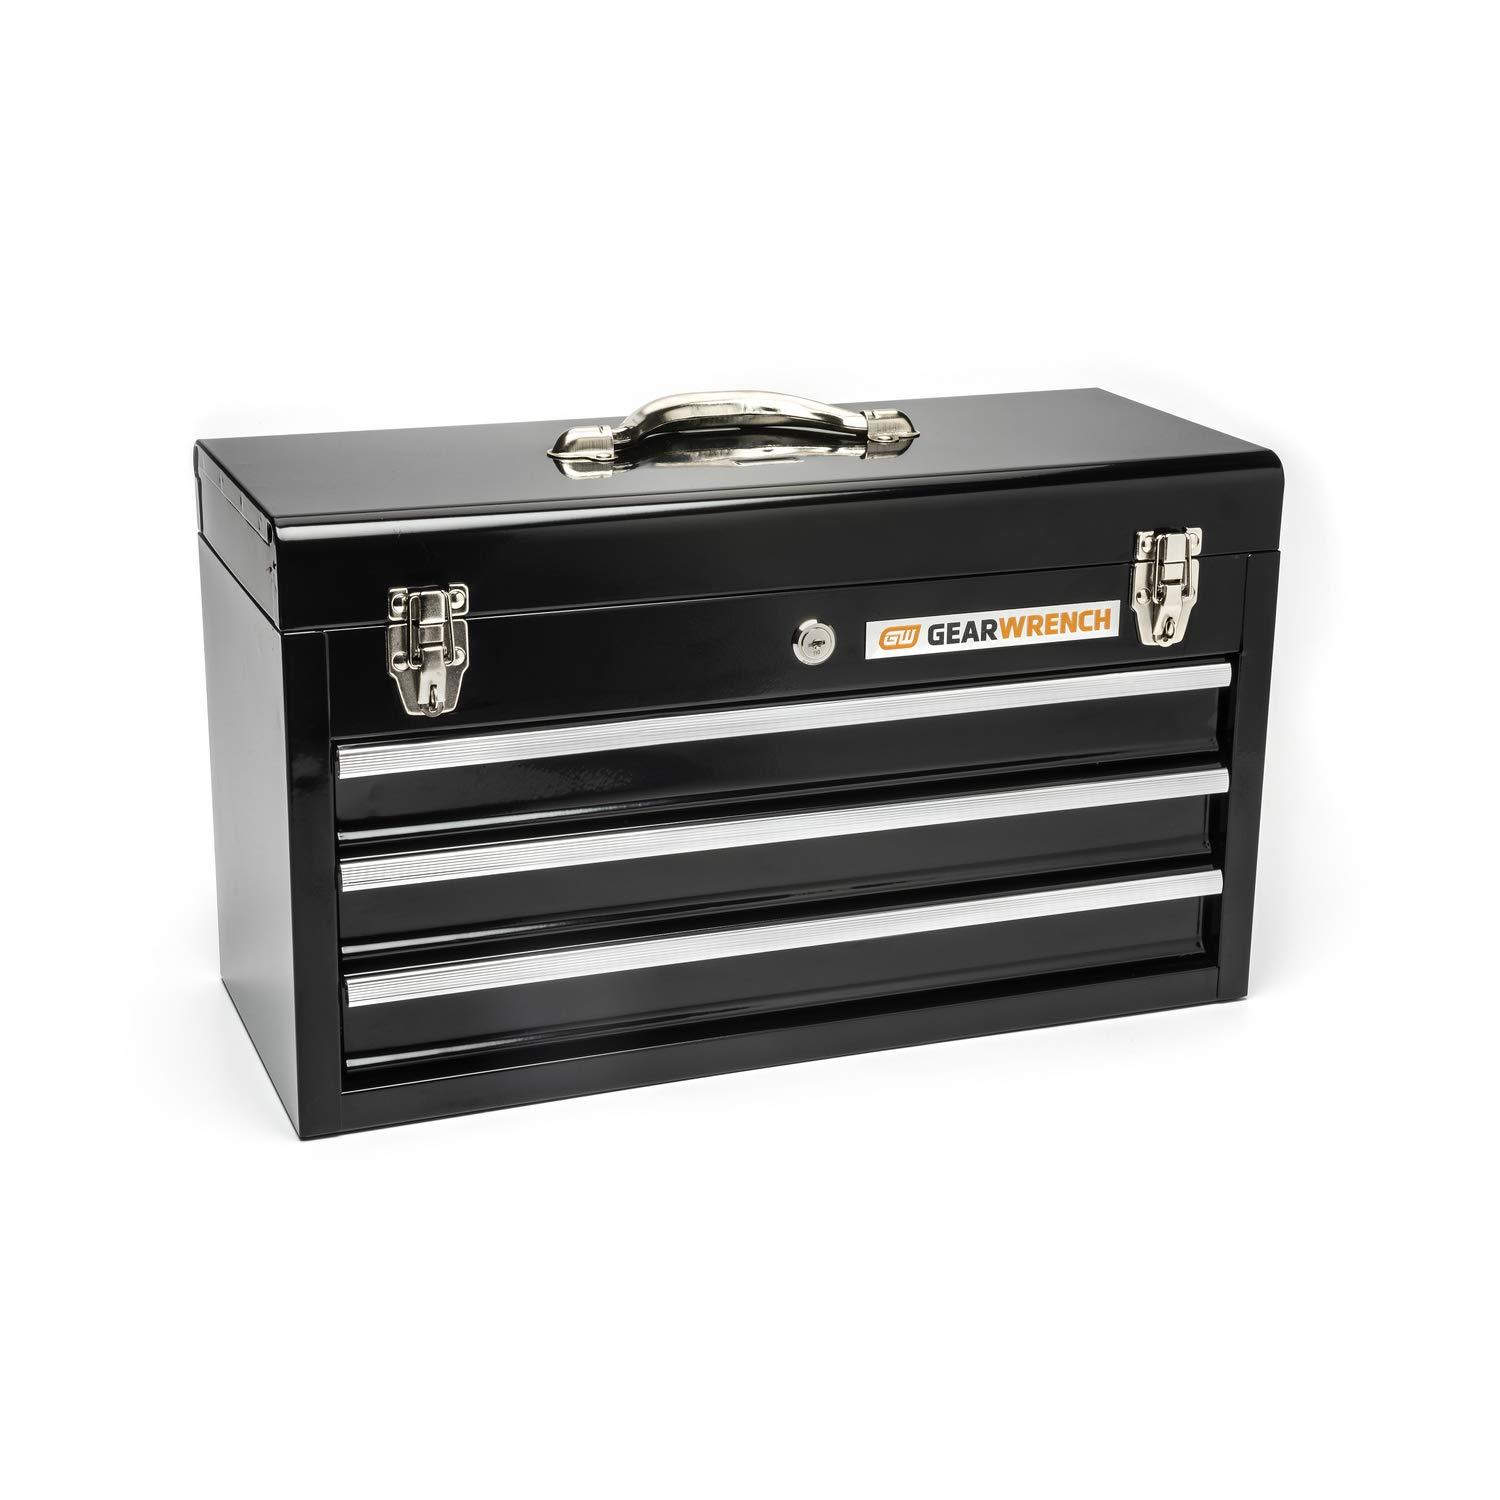 GEARWRENCH 20" 3 Drawer Steel Tool Box - $124.99